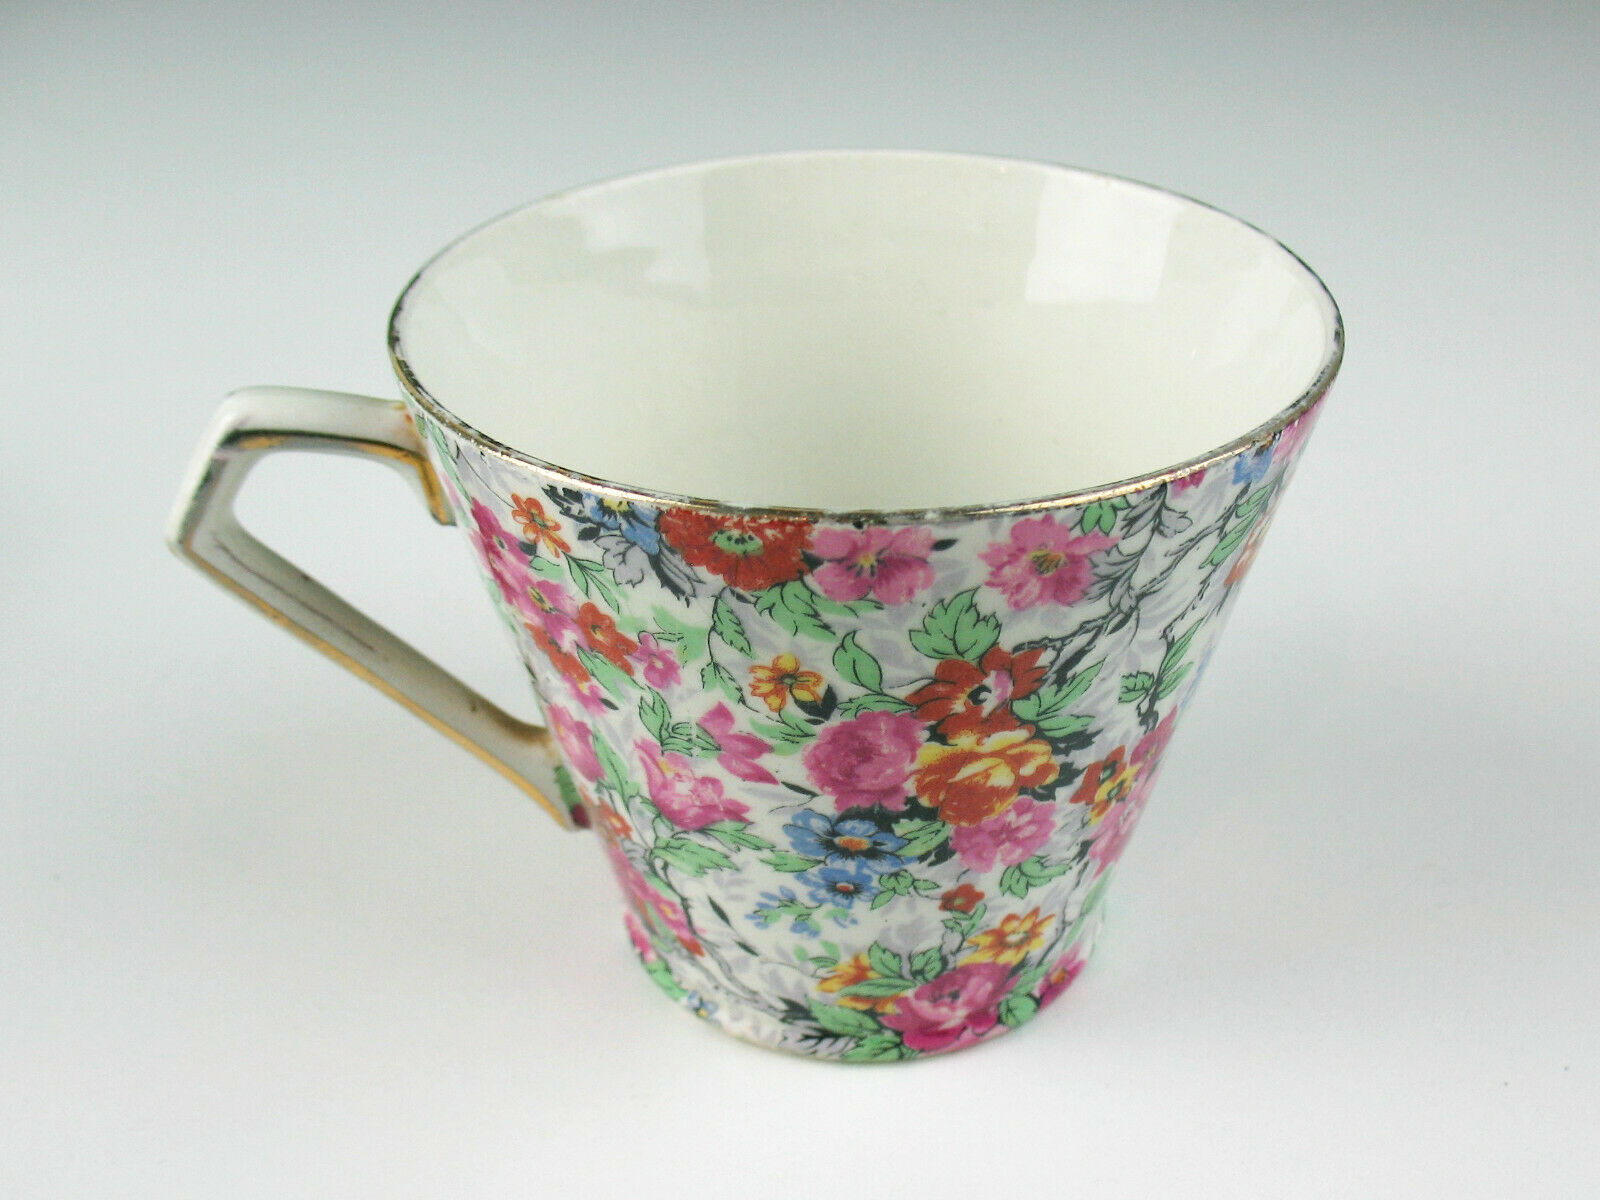 Orphan Teacup Only Lord Nelson Ware Marina Chintz Vintage England